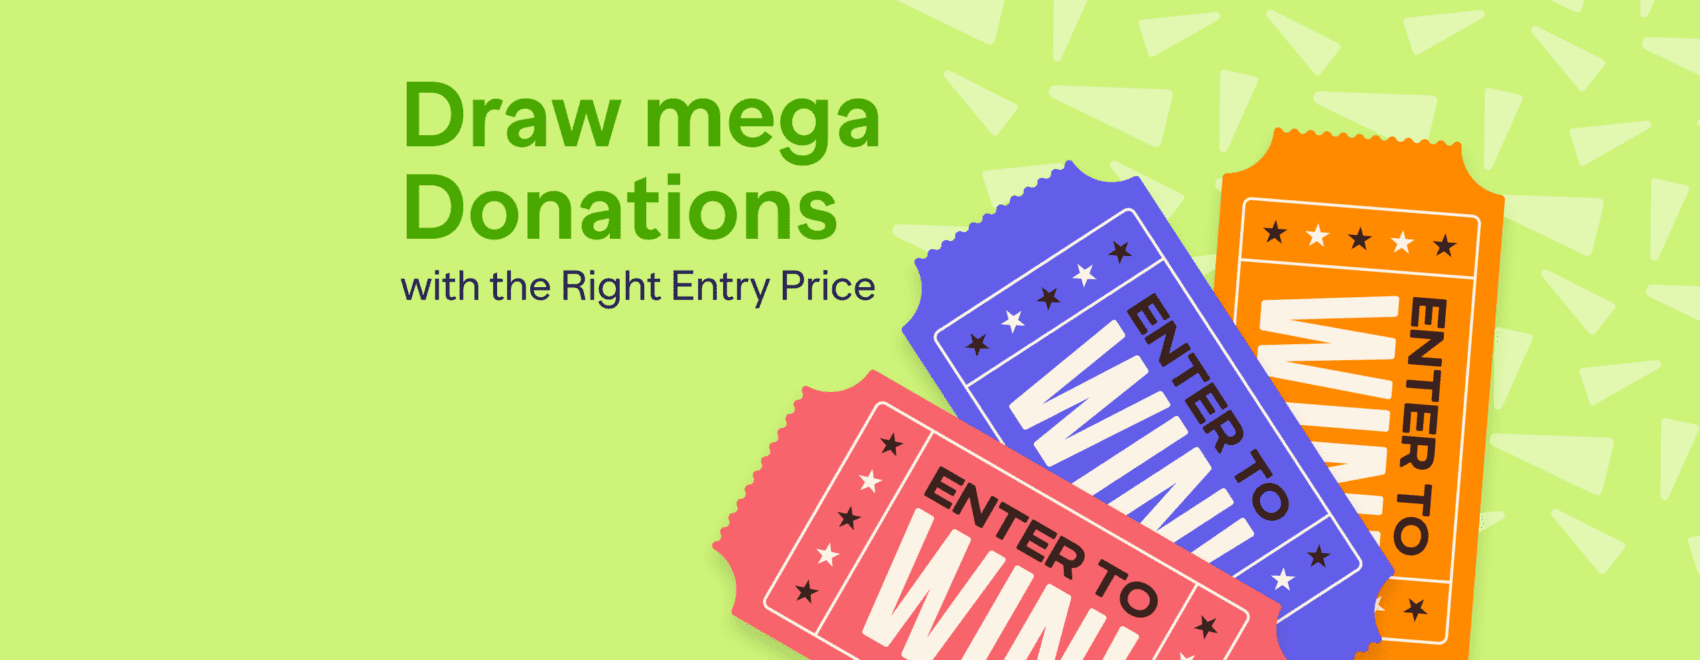 Draw mega donations with the Right Entry Price Solid